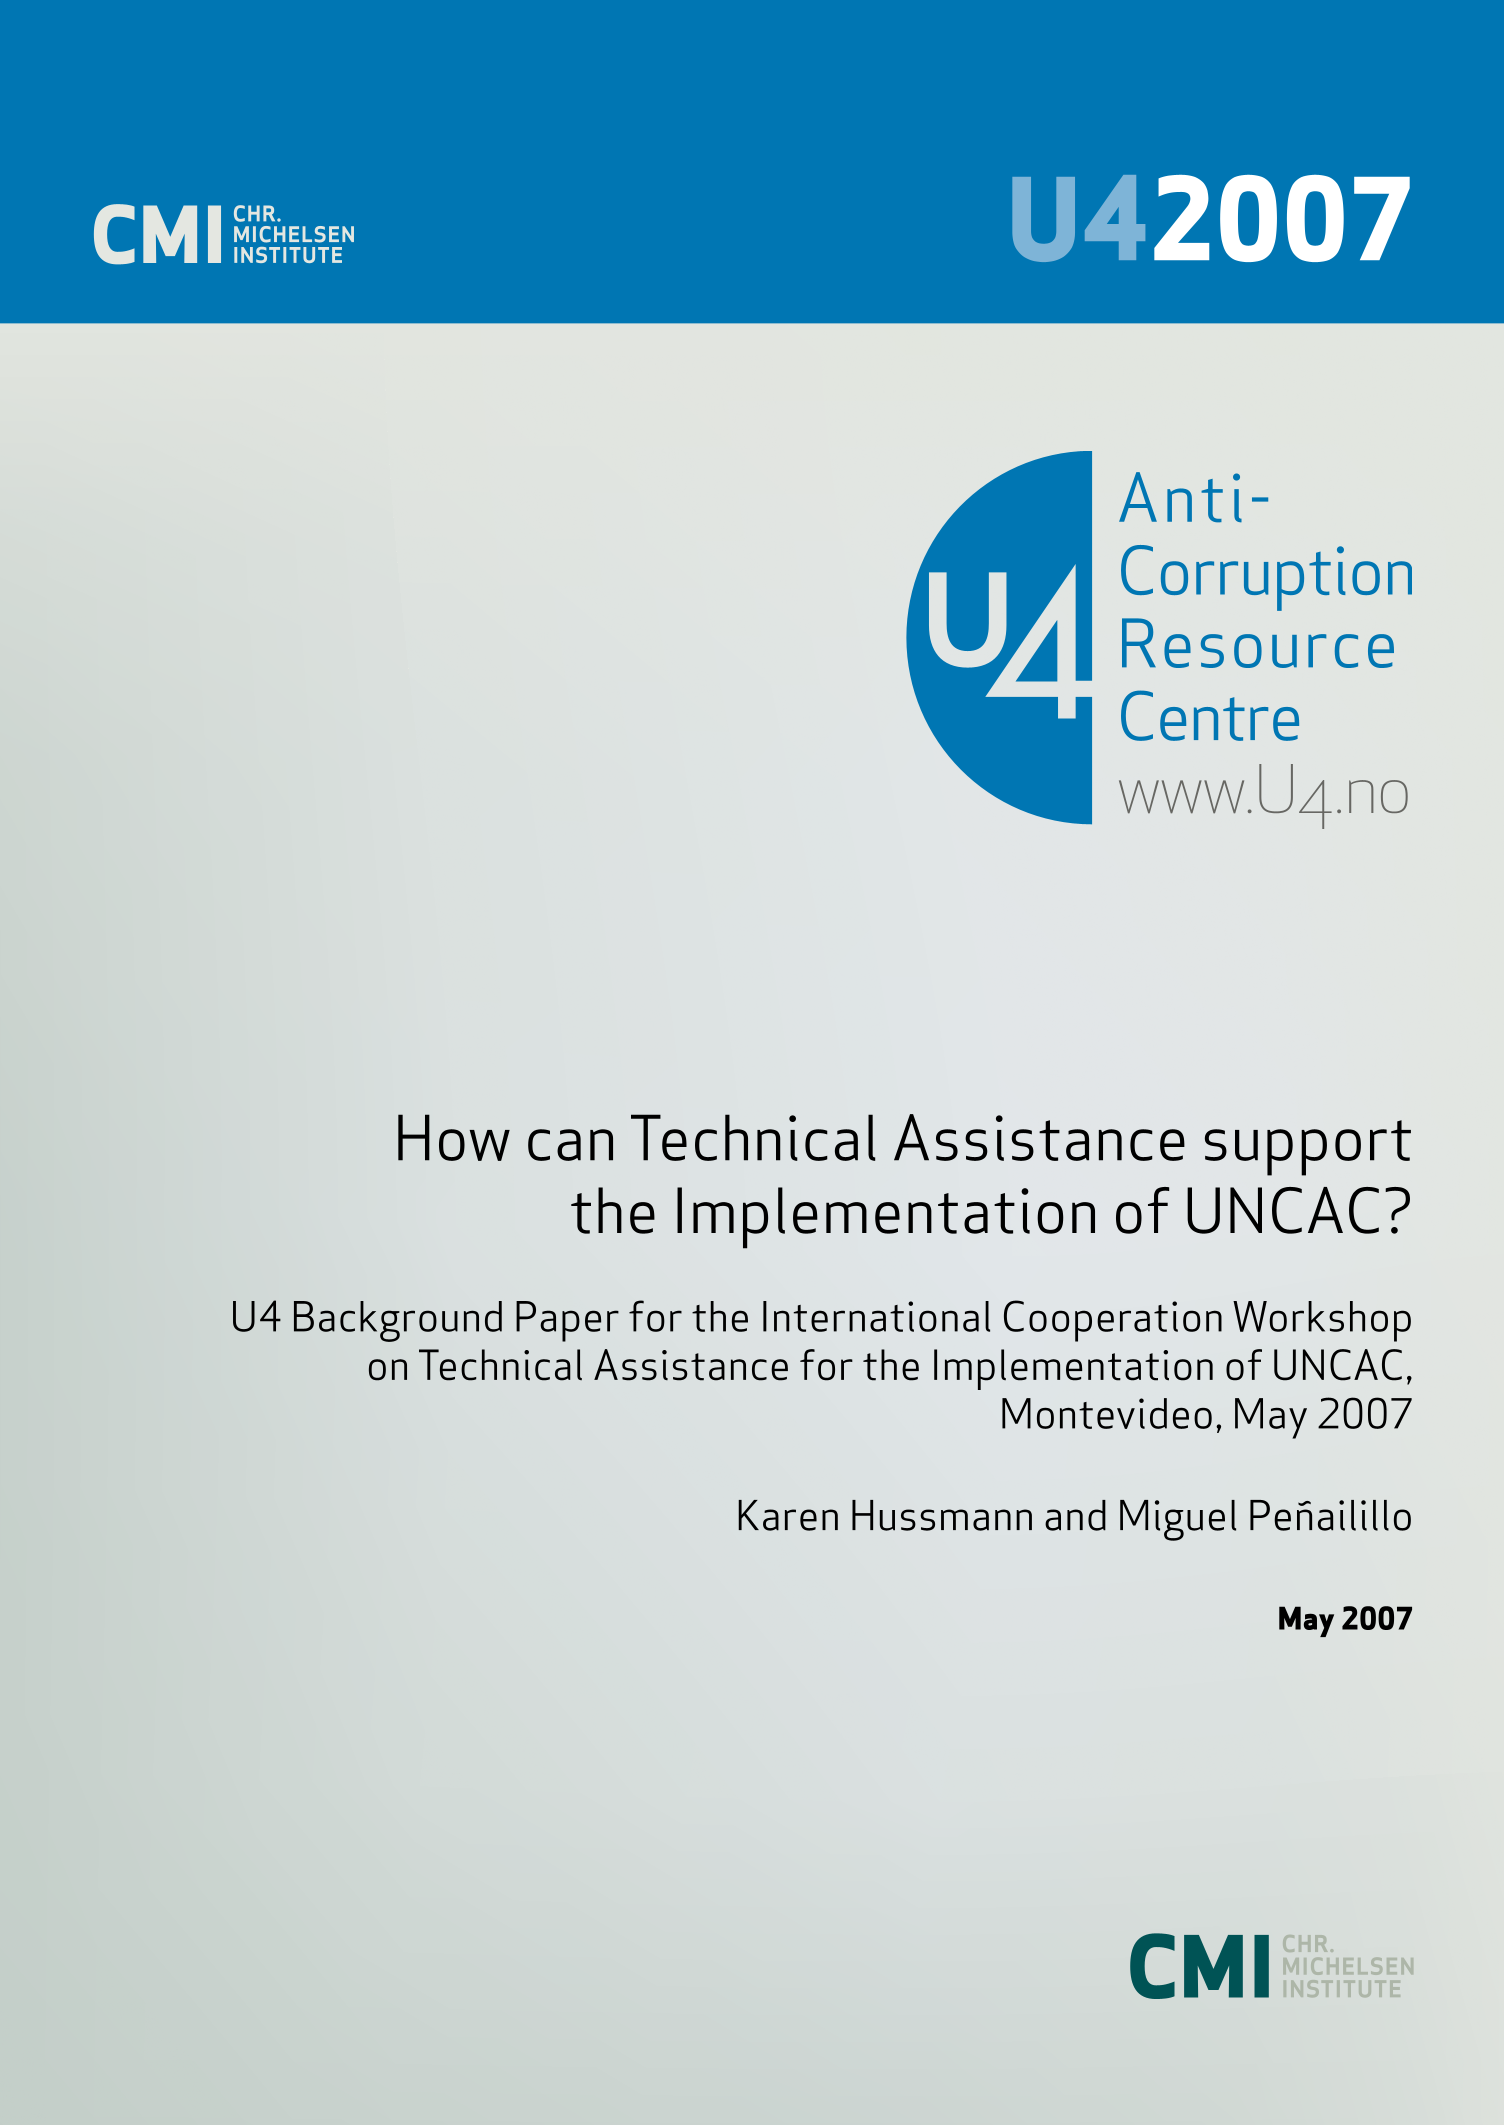 How can technical assistance support the implementation of UNCAC? U4 background paper for the international cooperation workshop on technical assistance for the implementation of UNCAC, Montevideo, May 2007